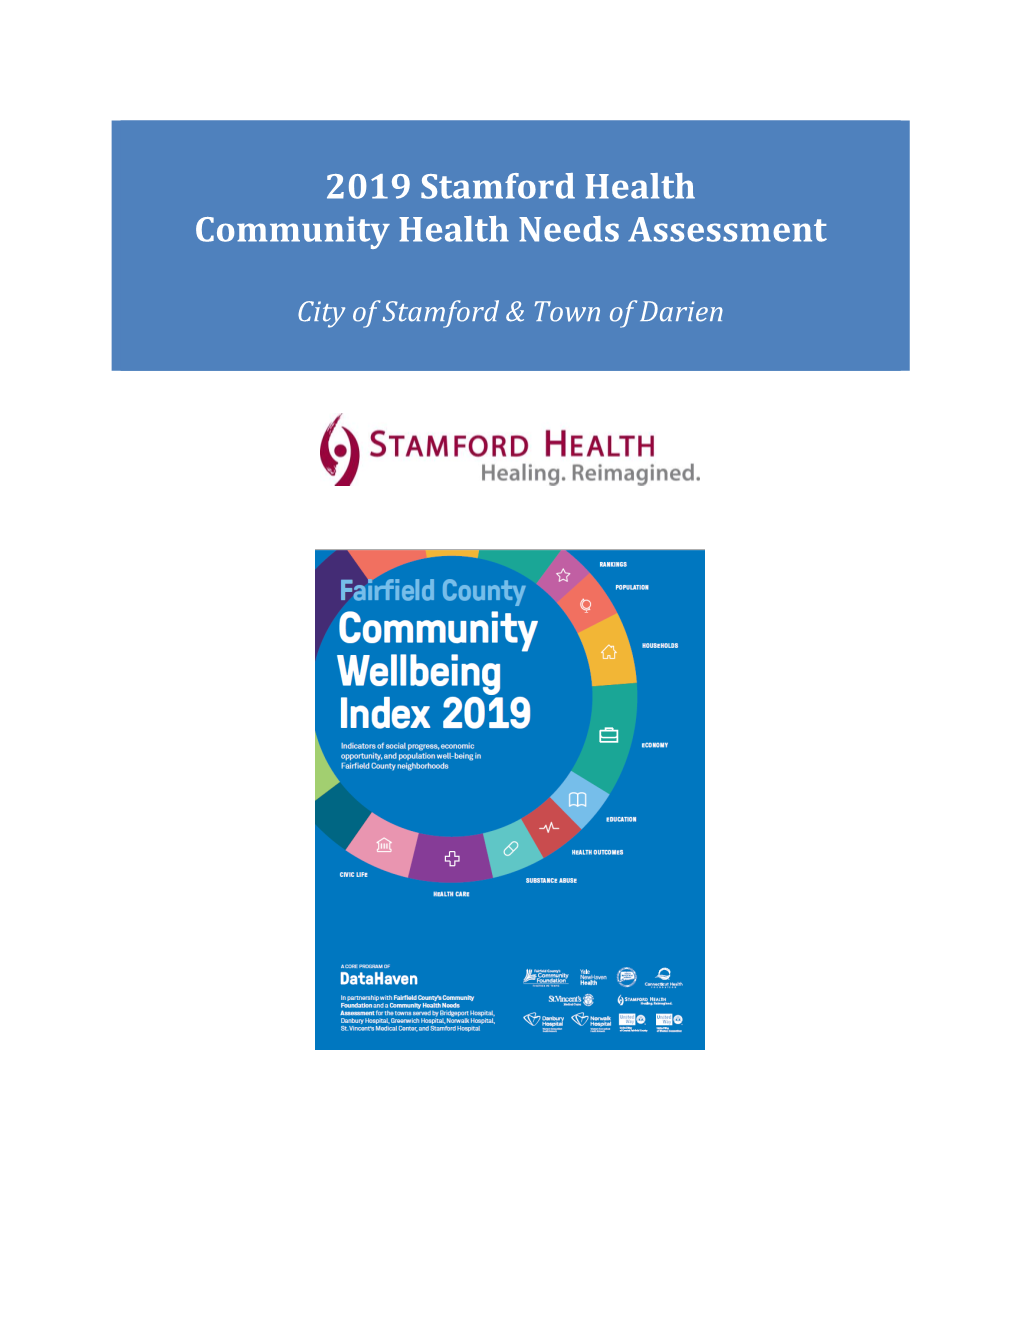 2016 Community Health Needs Assessment and Implementation Plan